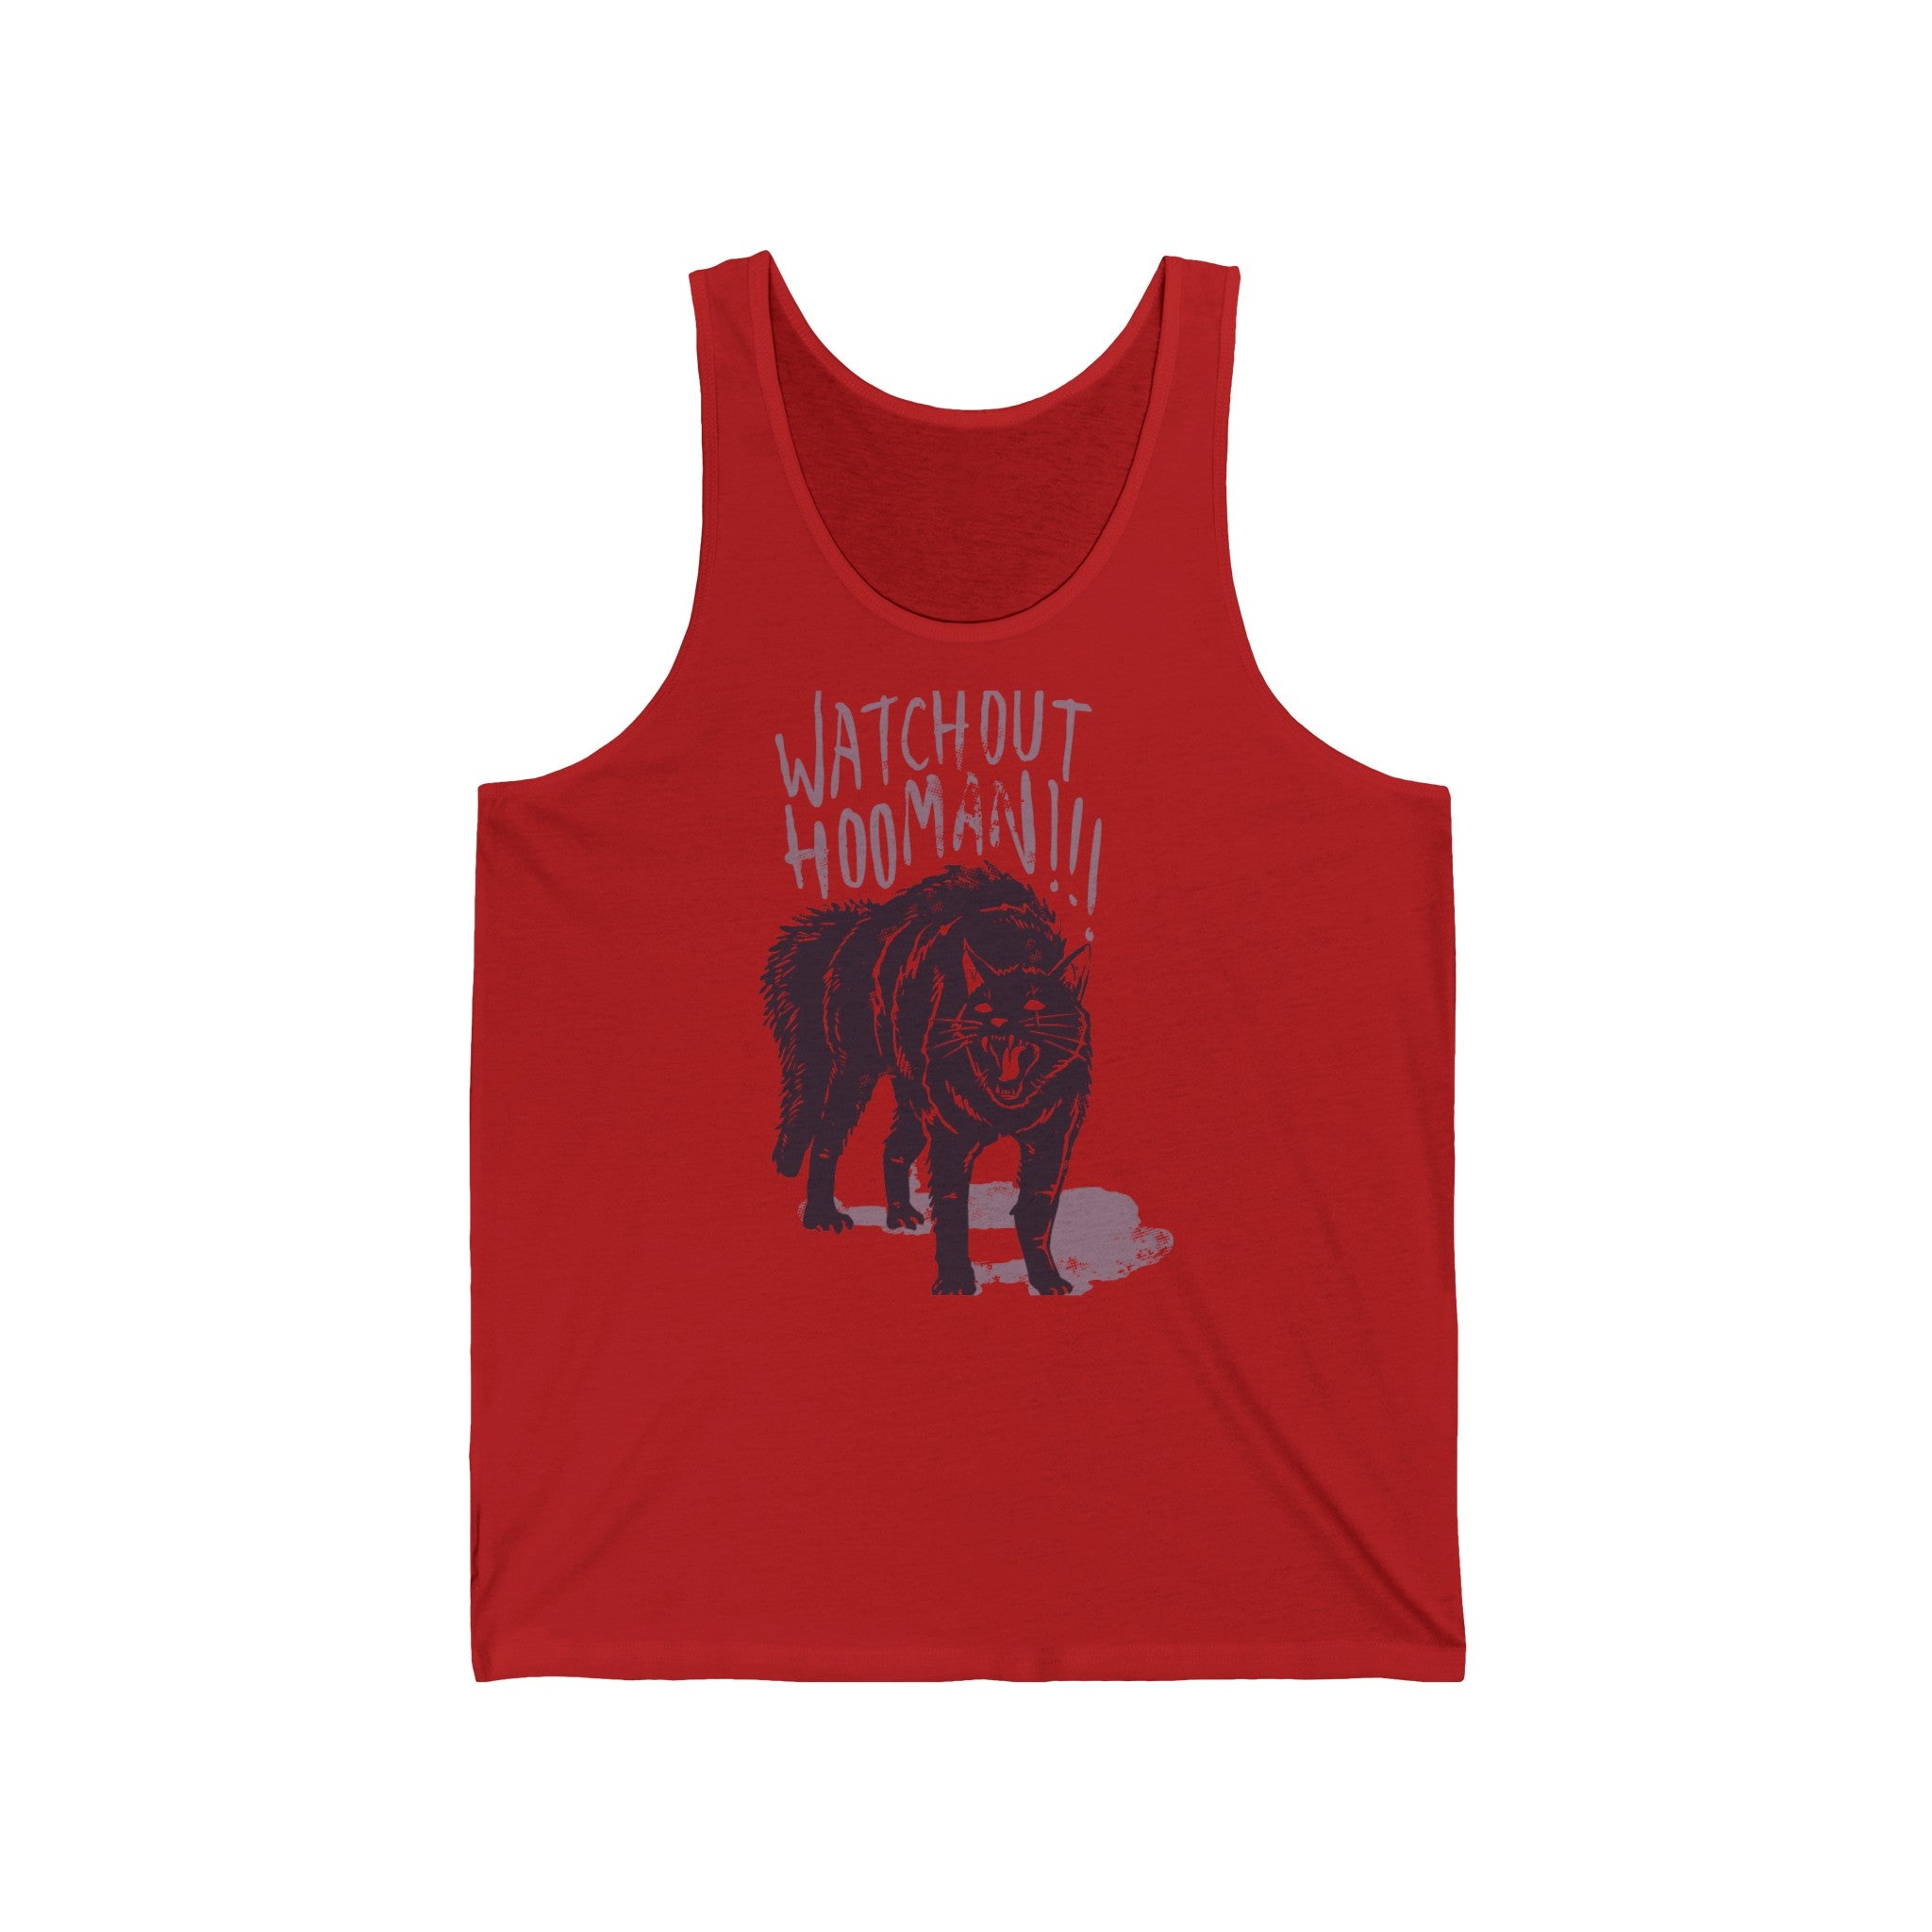 ANGRY CAT Unisex Jersey Tank